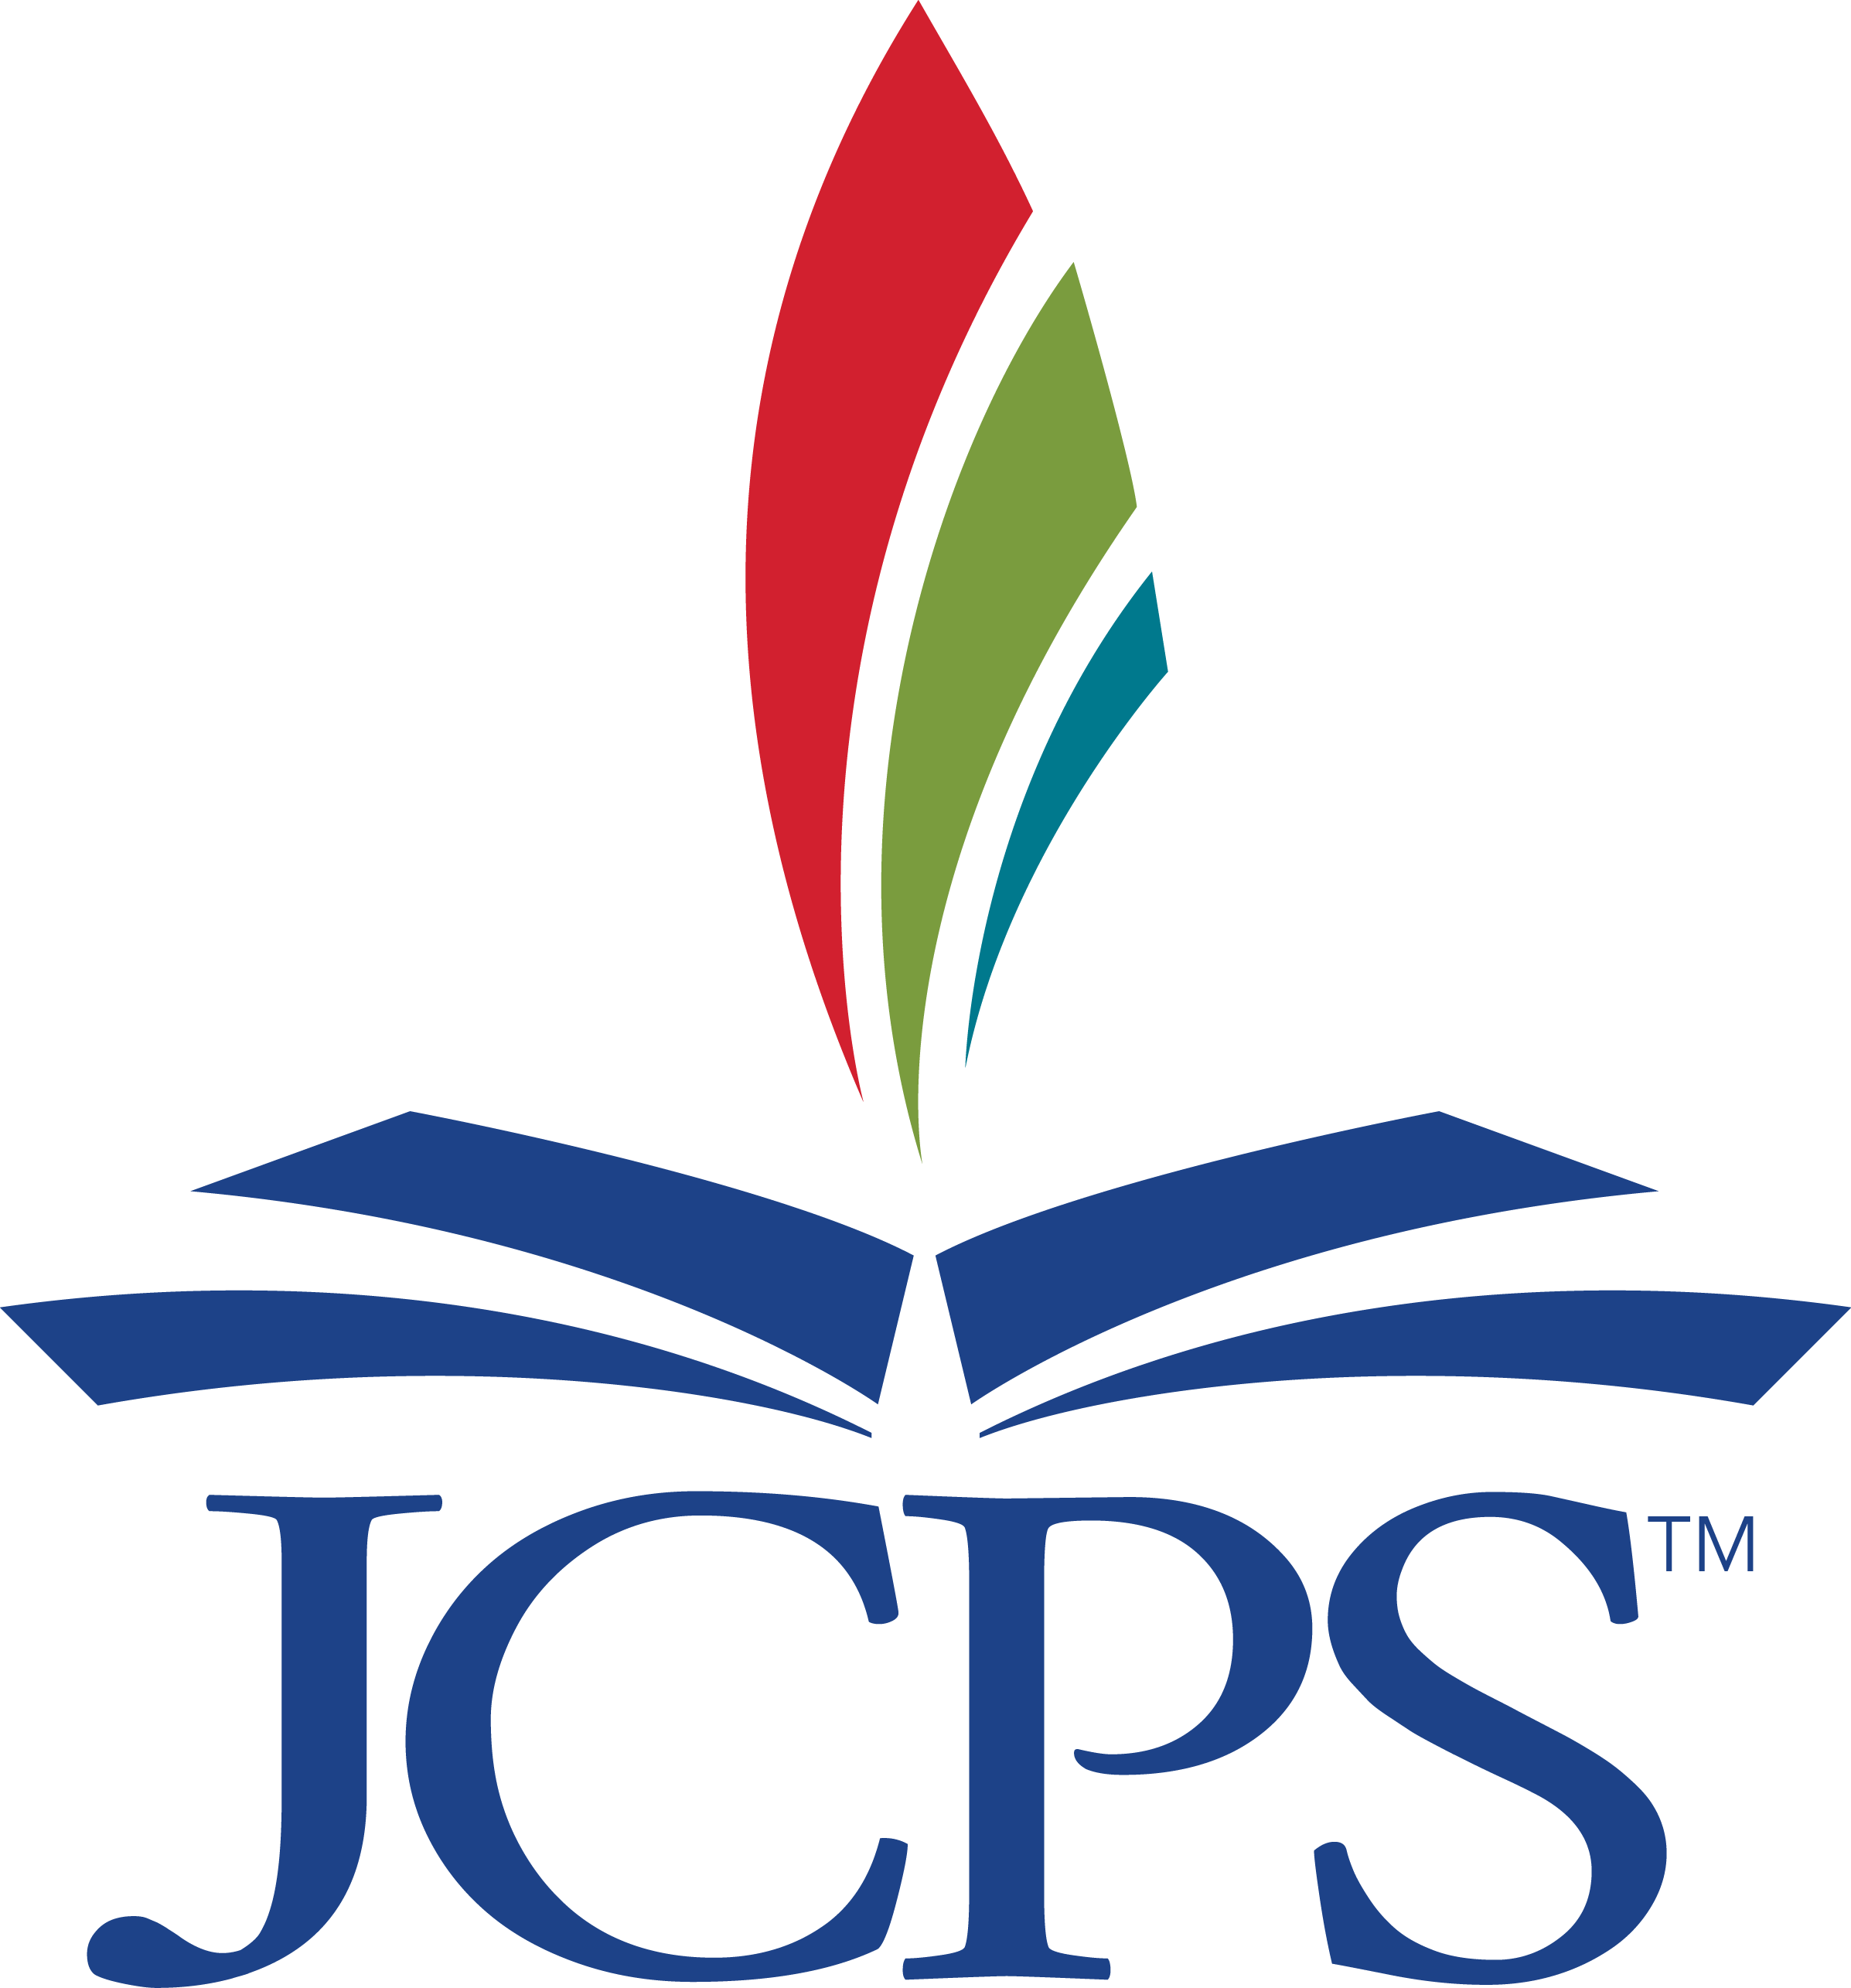 JCPS logo color_0_0.png